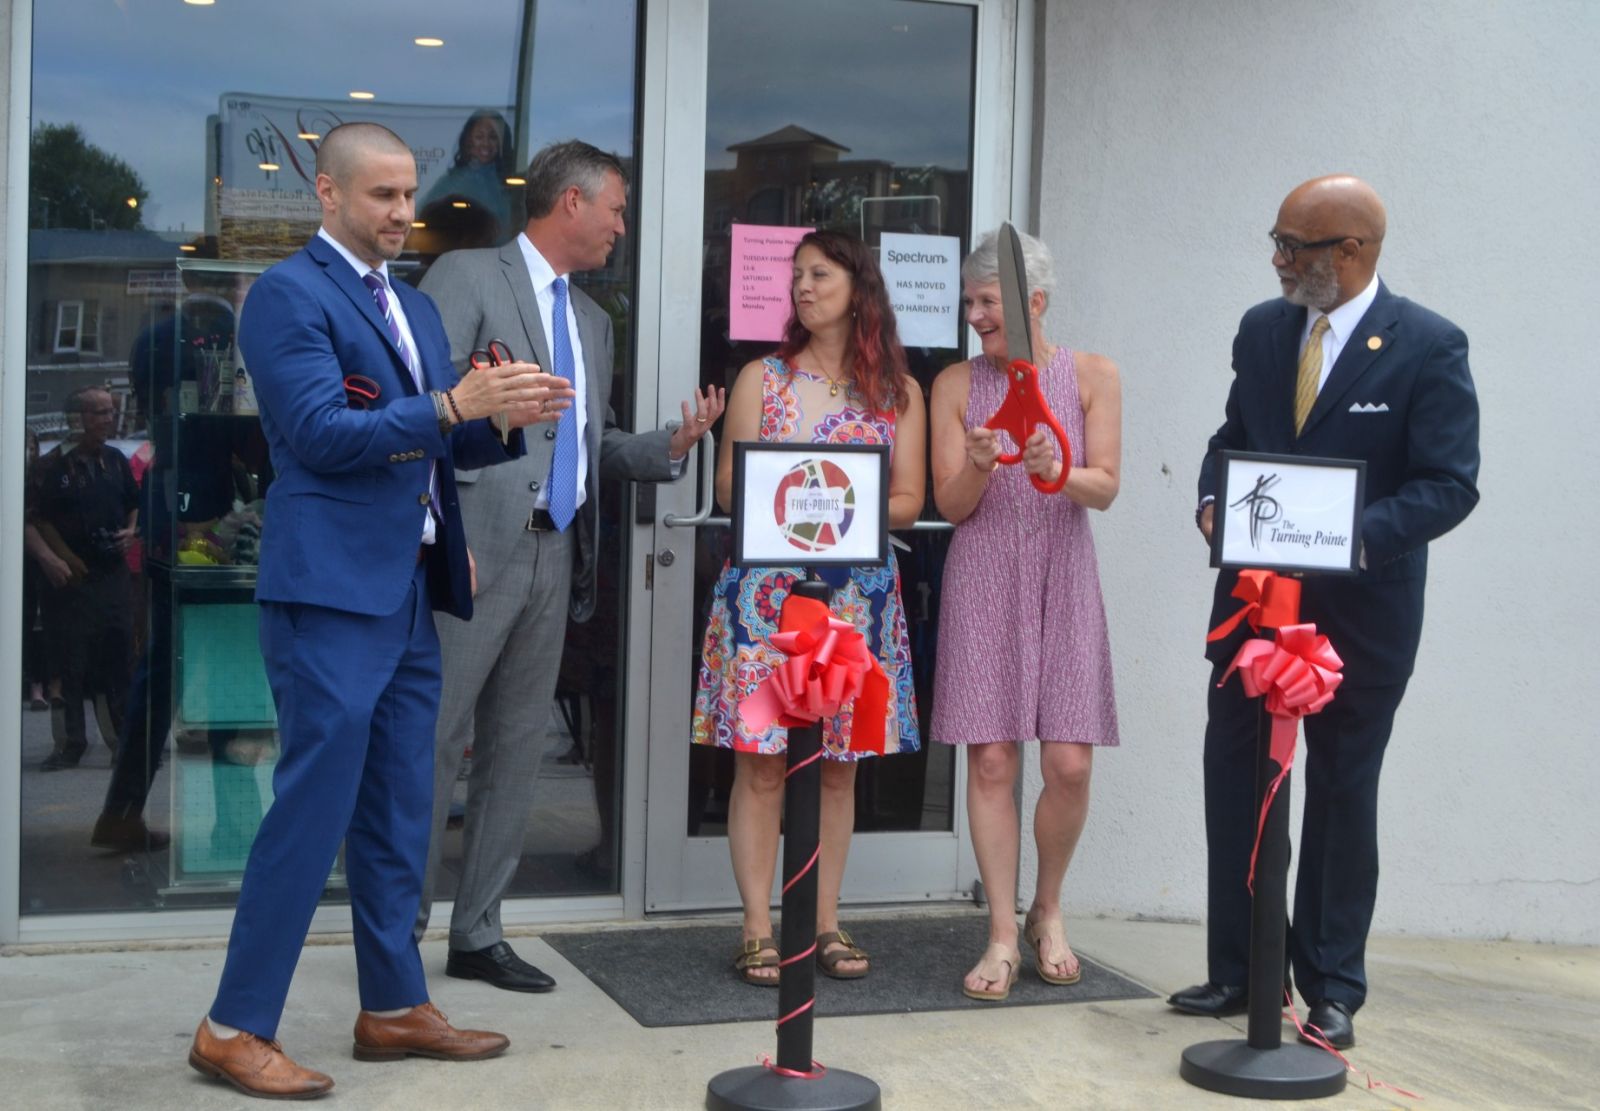 Ryan Coleman (left), director of the city of Columbia's Office of Economic Development, joins Columbia Mayor Daniel Rickenmann (second from left) and City Councilman Ed McDowell (right) in helping Coleen Strasburger (with scissors) cut the ribbon on The Turning Pointe's new location. (Photo/Melinda Waldrop)